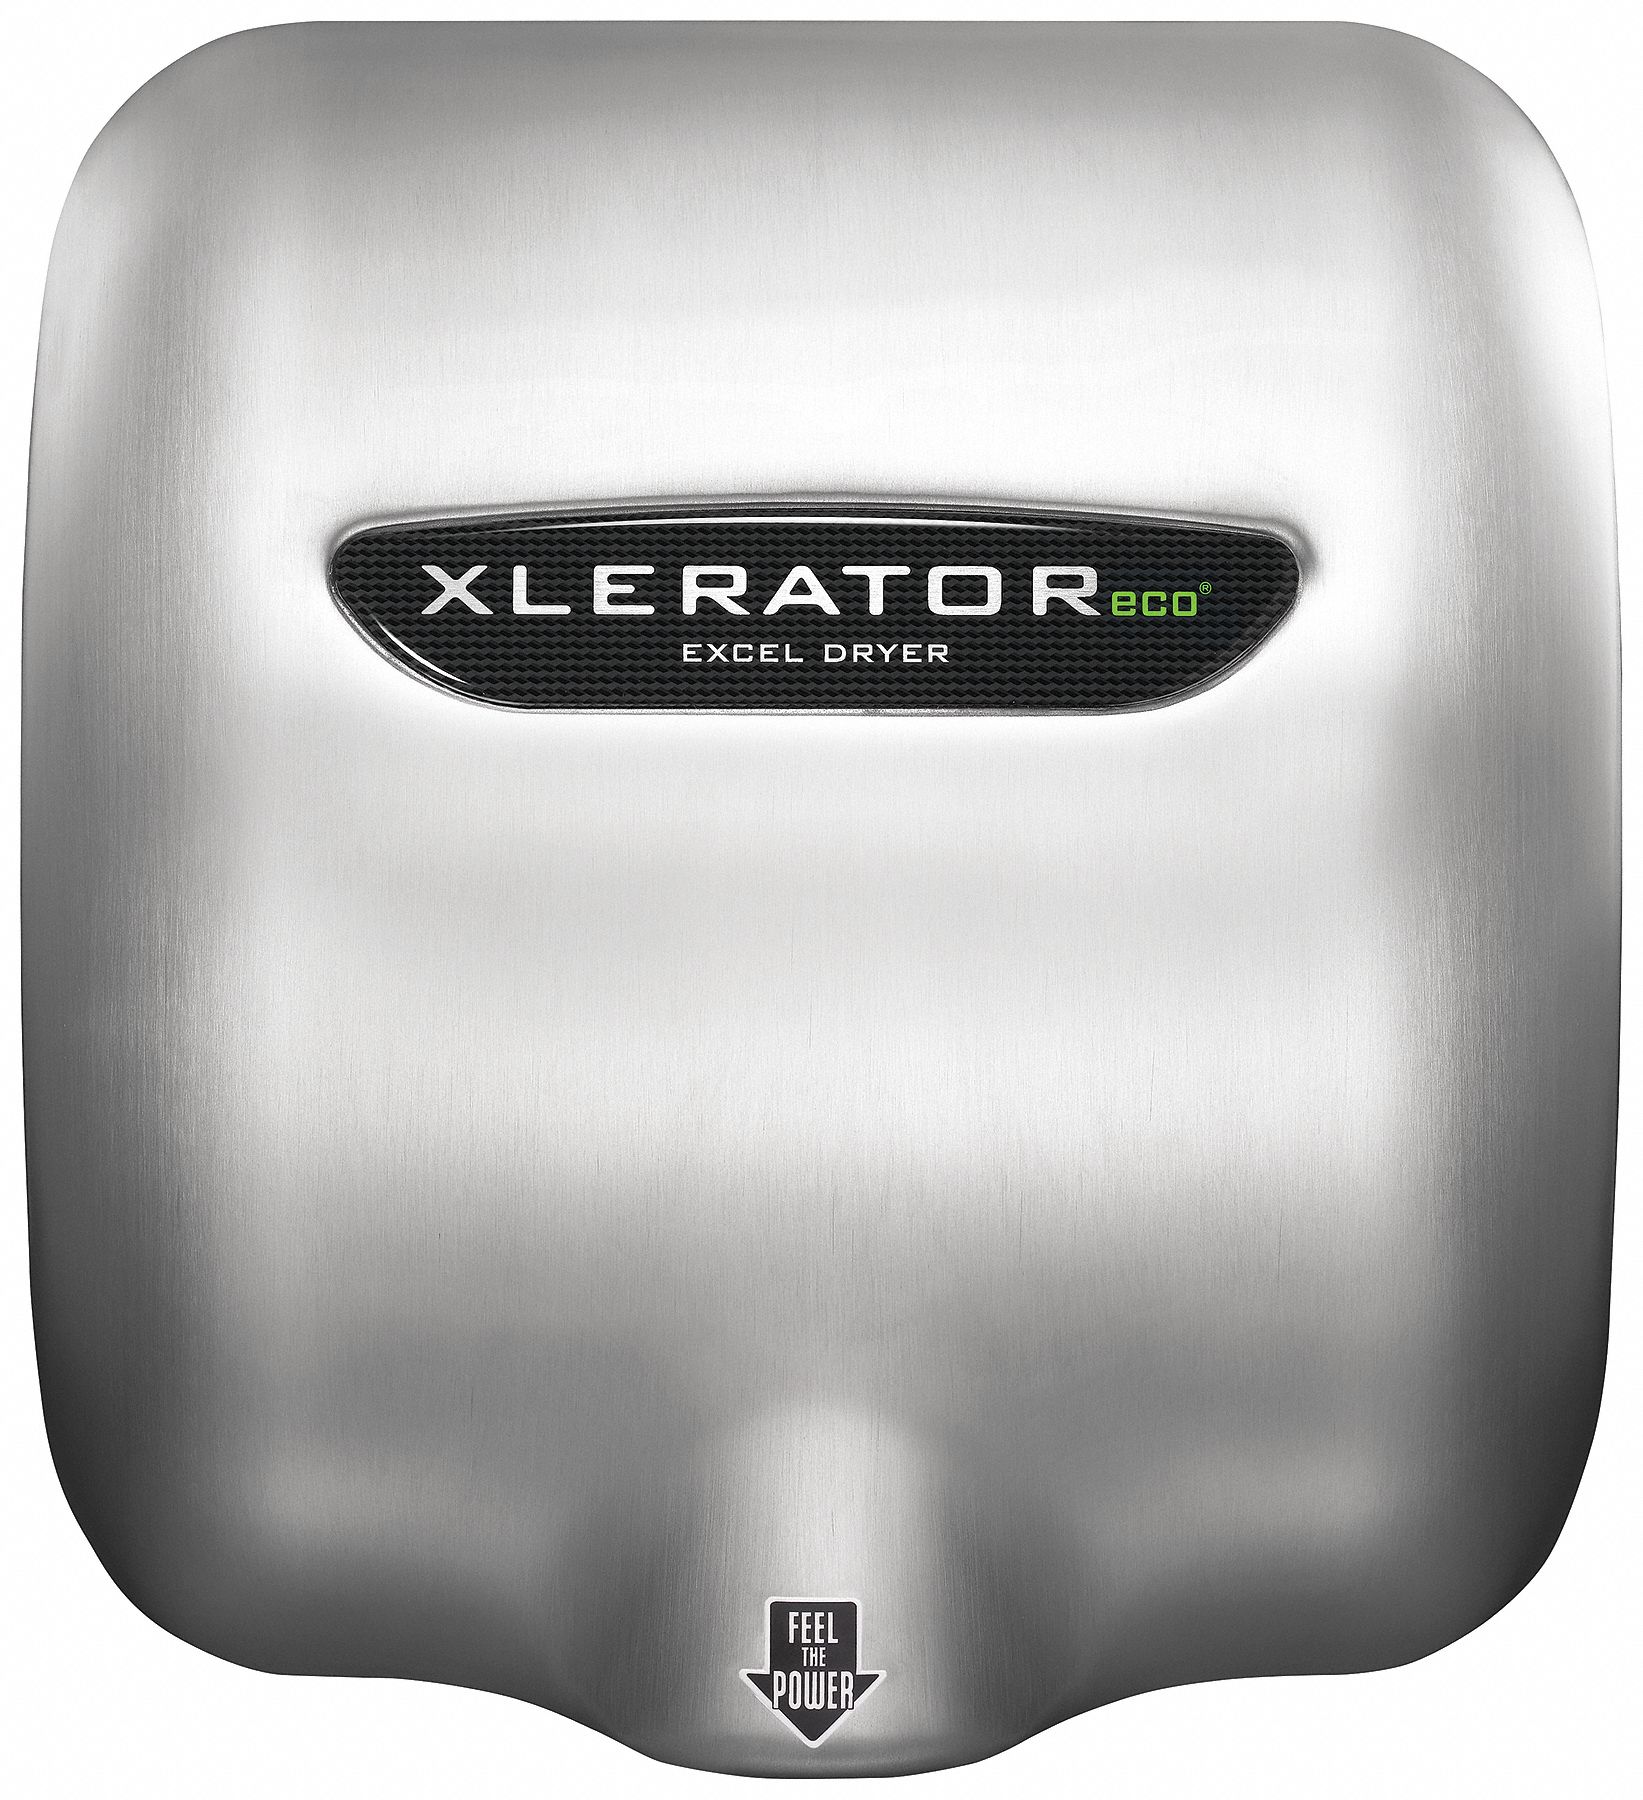 Hand Dryer: Integral, Stainless Steel, Auto, Silver, 12 sec Dry Time, 5.6/6.2 Amps